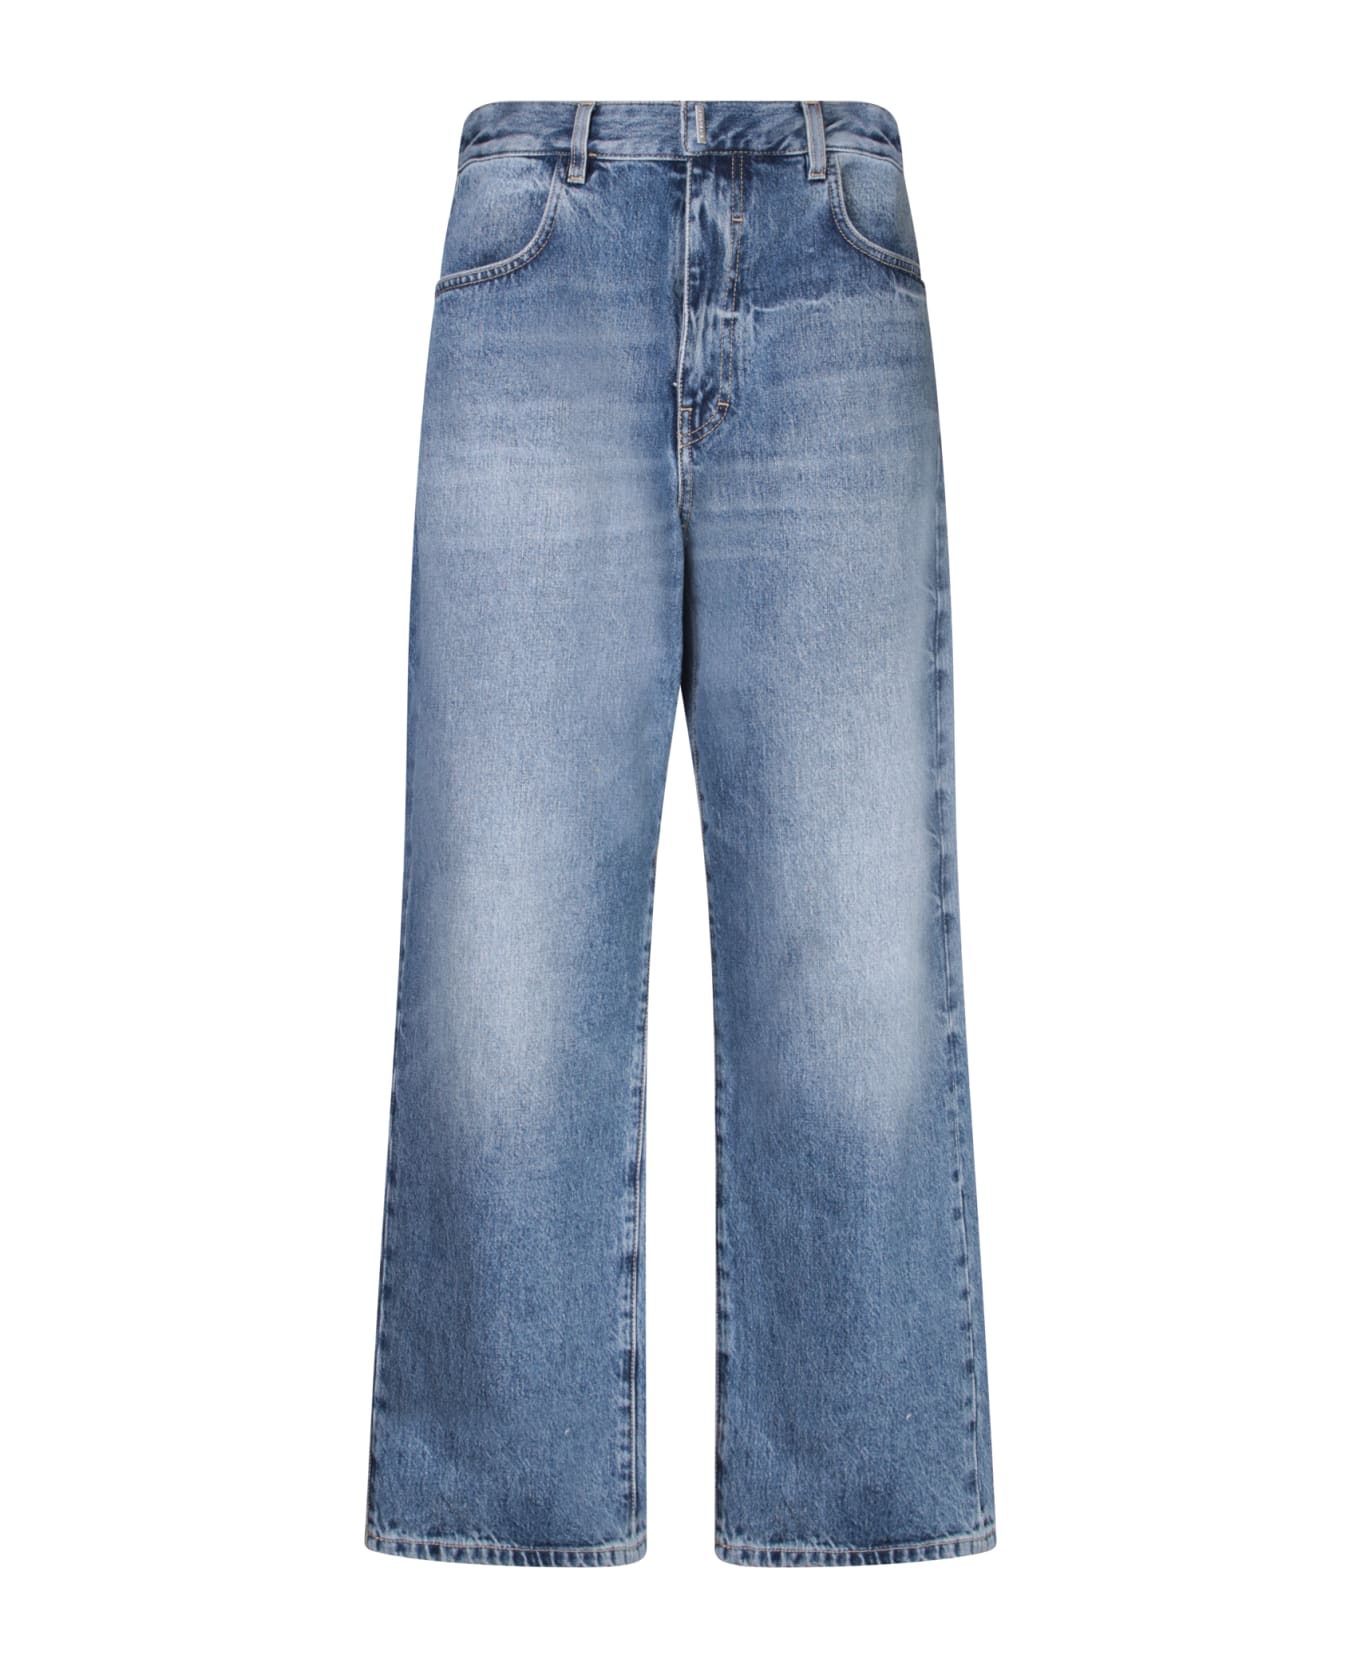 Givenchy Straight Dark Blue Jeans - Blue